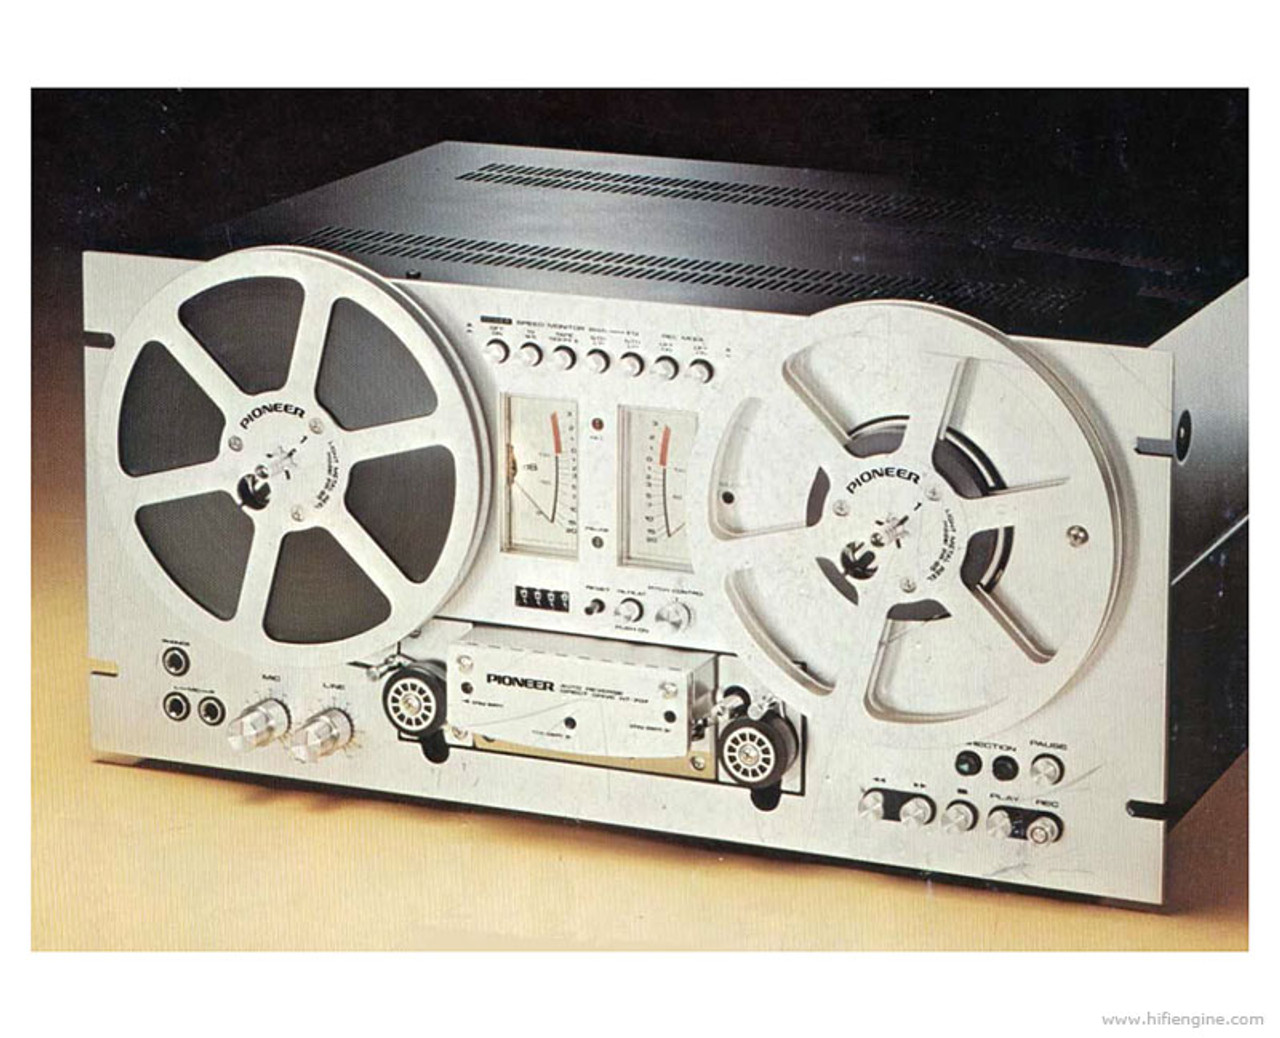 Pioneer RT-707 The MOST FUN Analog Reel to Reel Ever Made! 